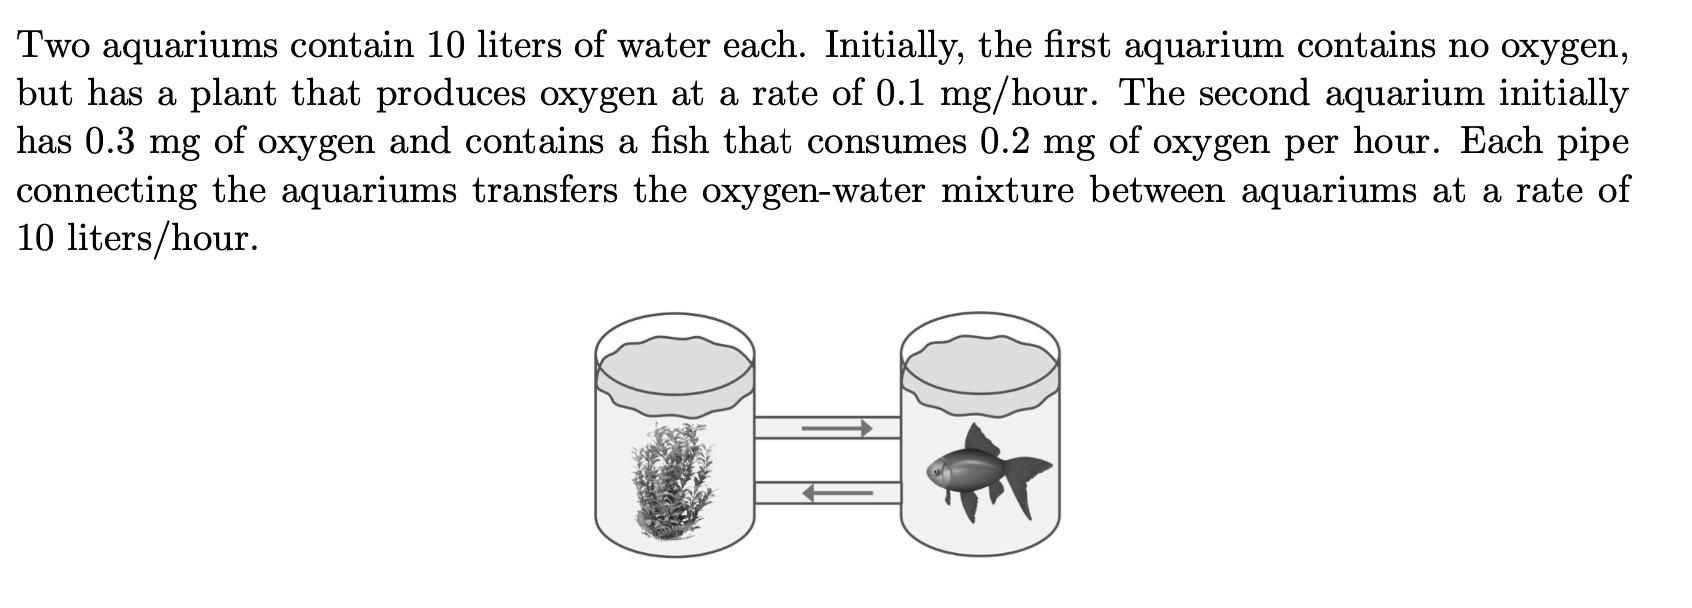 Two aquariums contain 10 liters of water each. Initially, the first aquarium contains no oxygen, but has a plant that produce